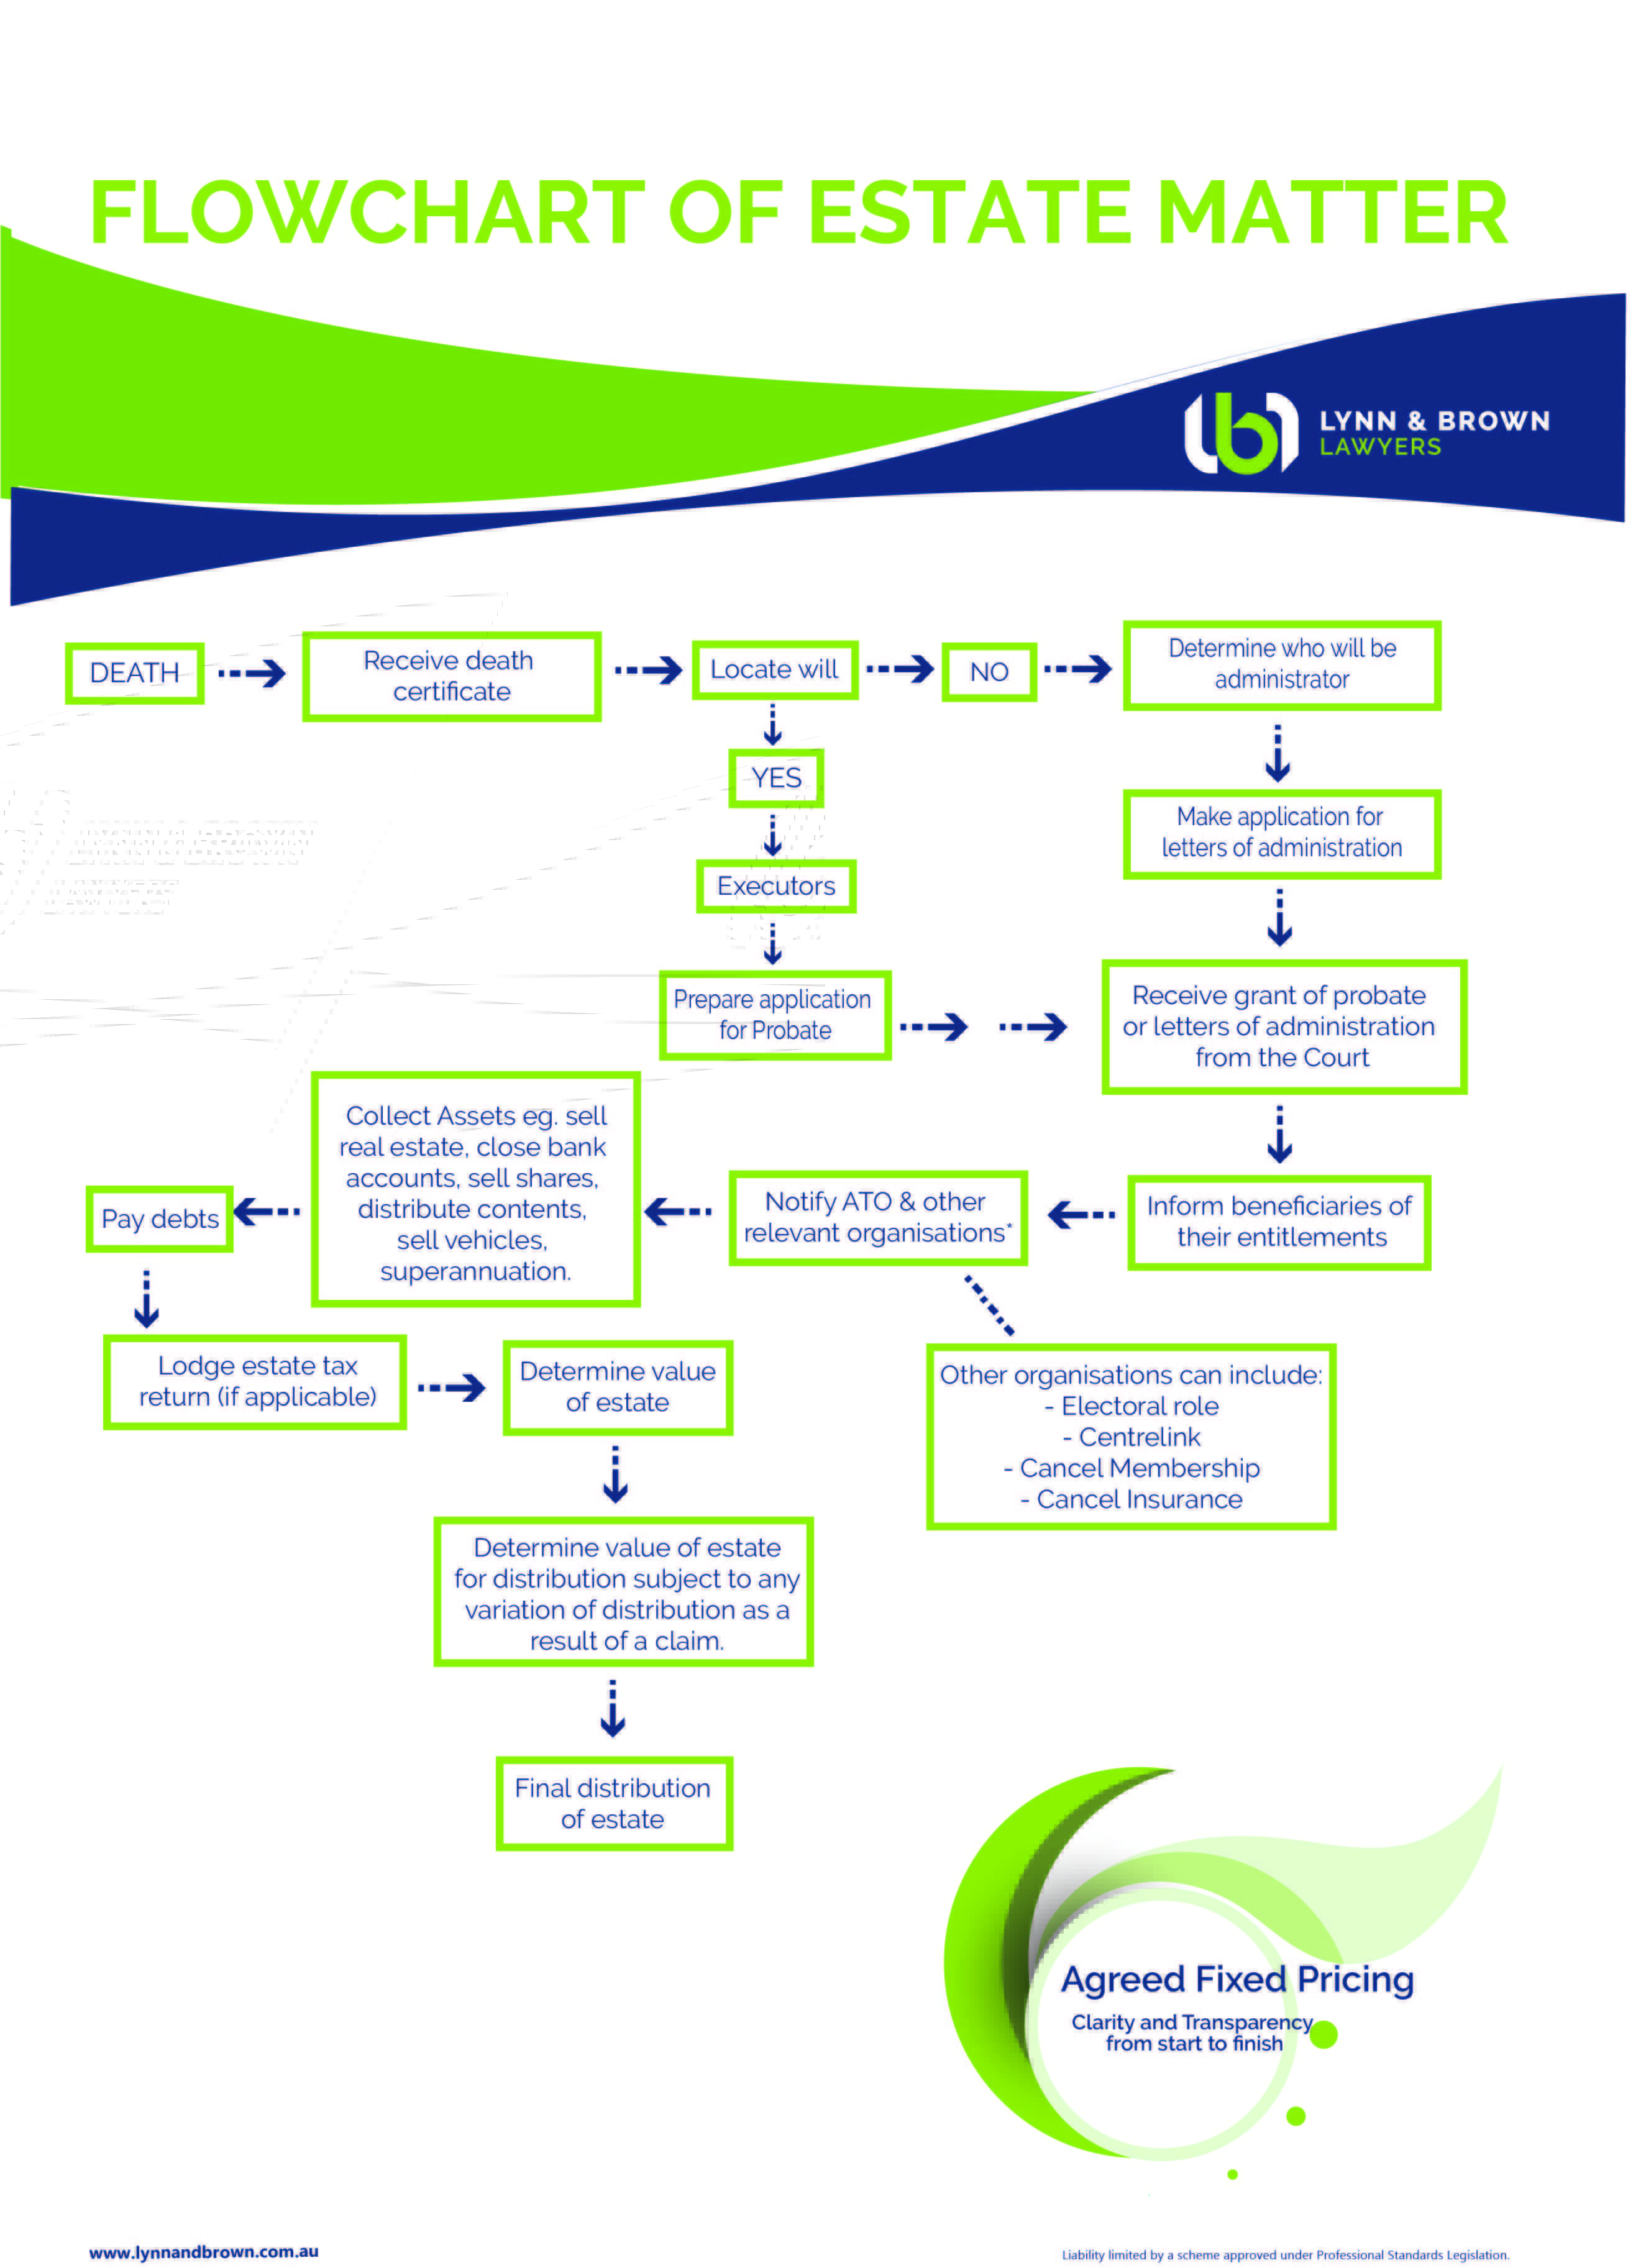 Flowchart of the estate planning process